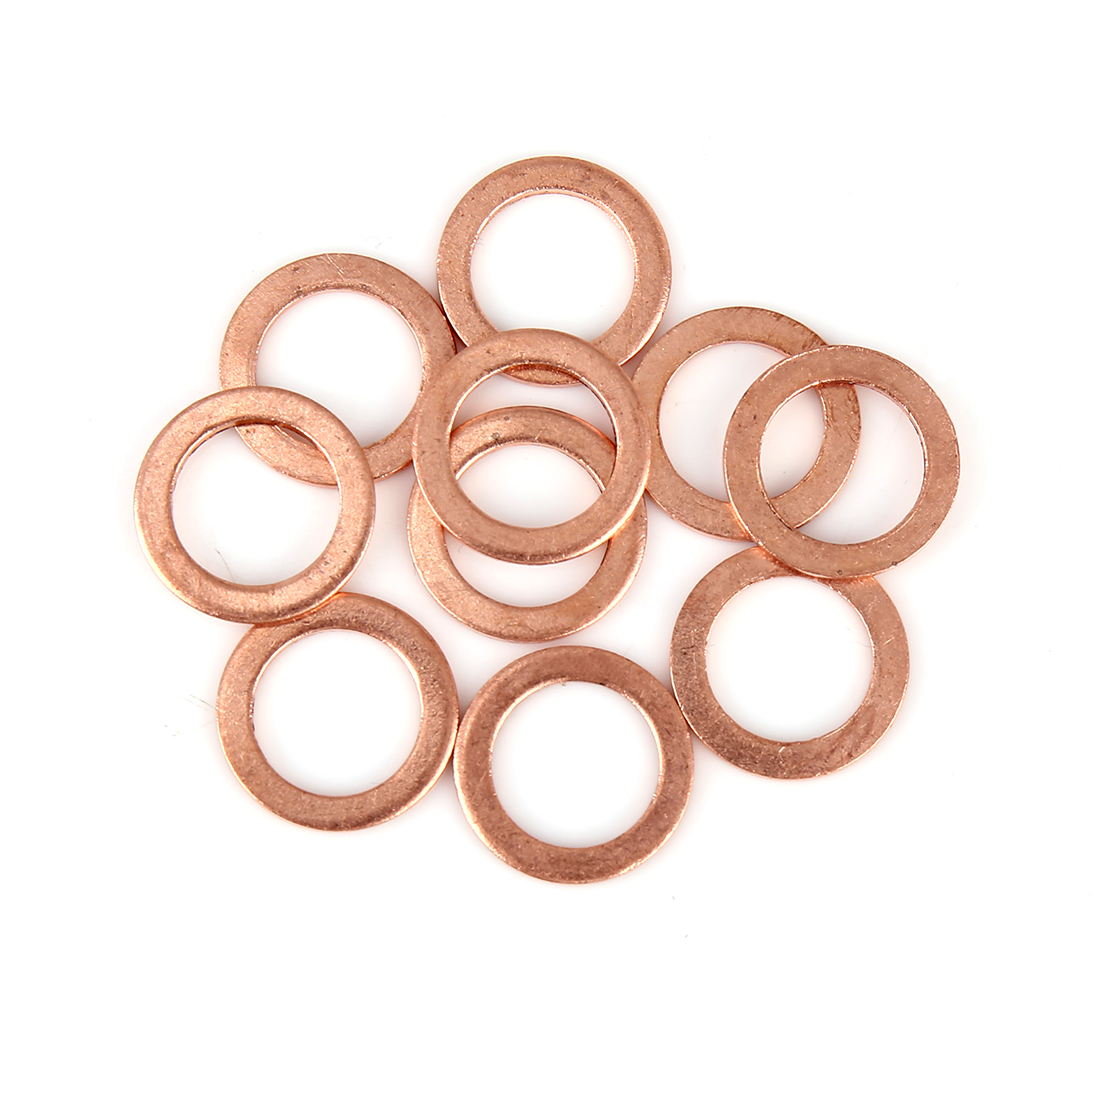 Unique Bargains 10pcs Copper Washer Flat Sealing Gasket Ring Spacer for Car 14 x 20 x 1.5mm